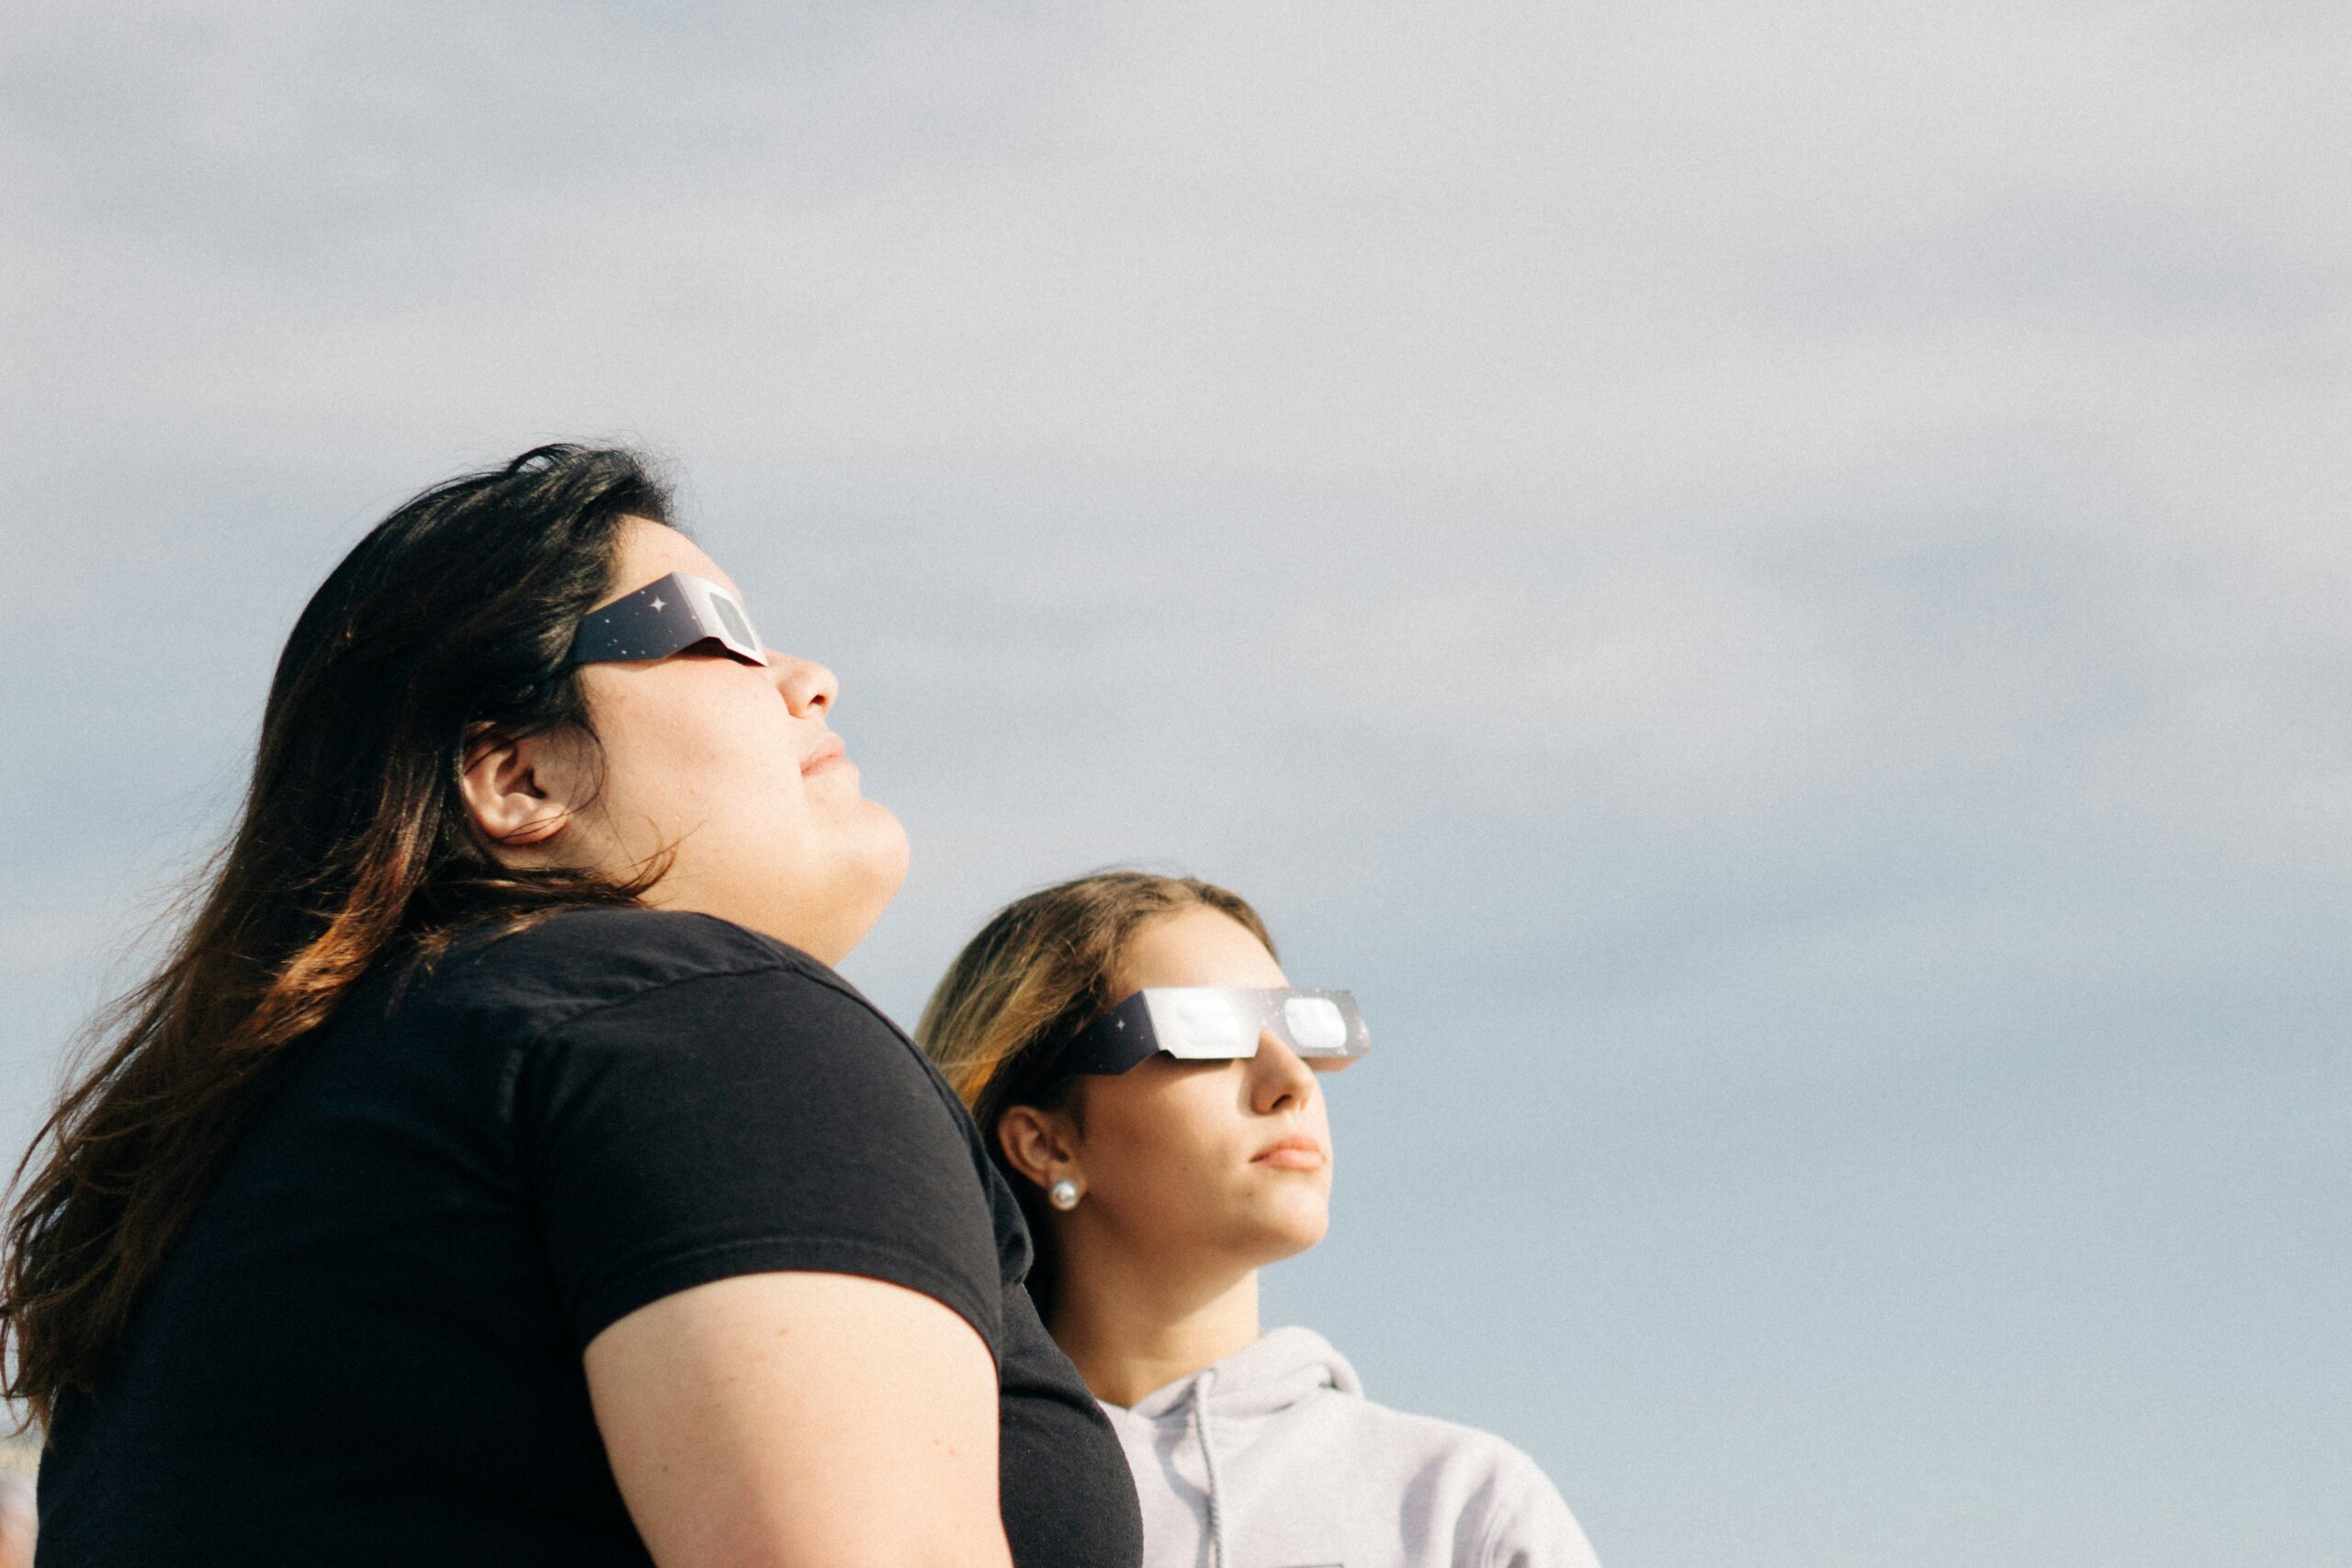 Two women watching solar eclipse with glasses on.